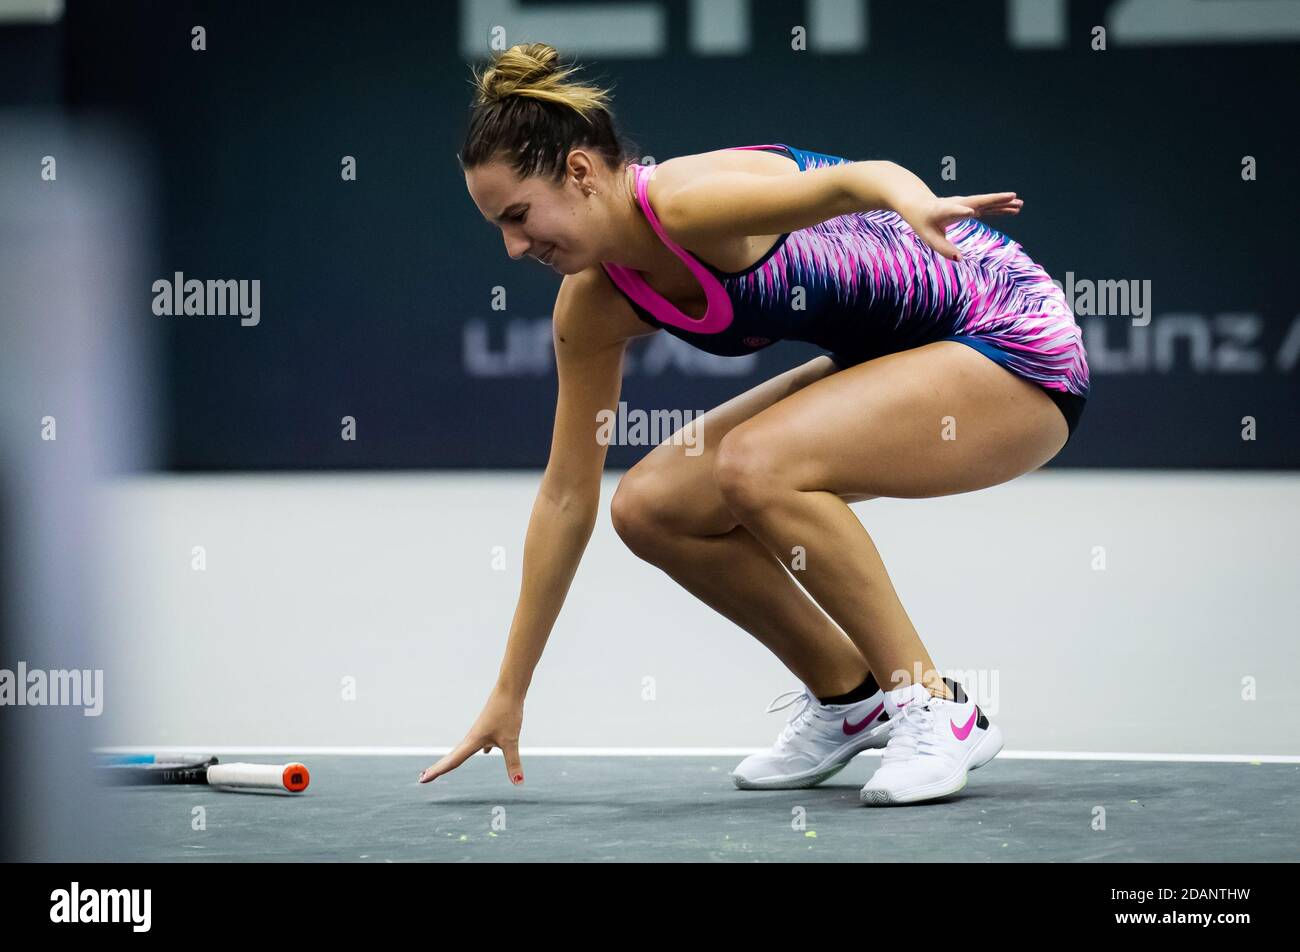 Oceane Dodin of France suffers an ankle injury during the quarter-final against Aryna Sabalenka of Belarus at the 2020 Upper Austr / LM Stock Photo